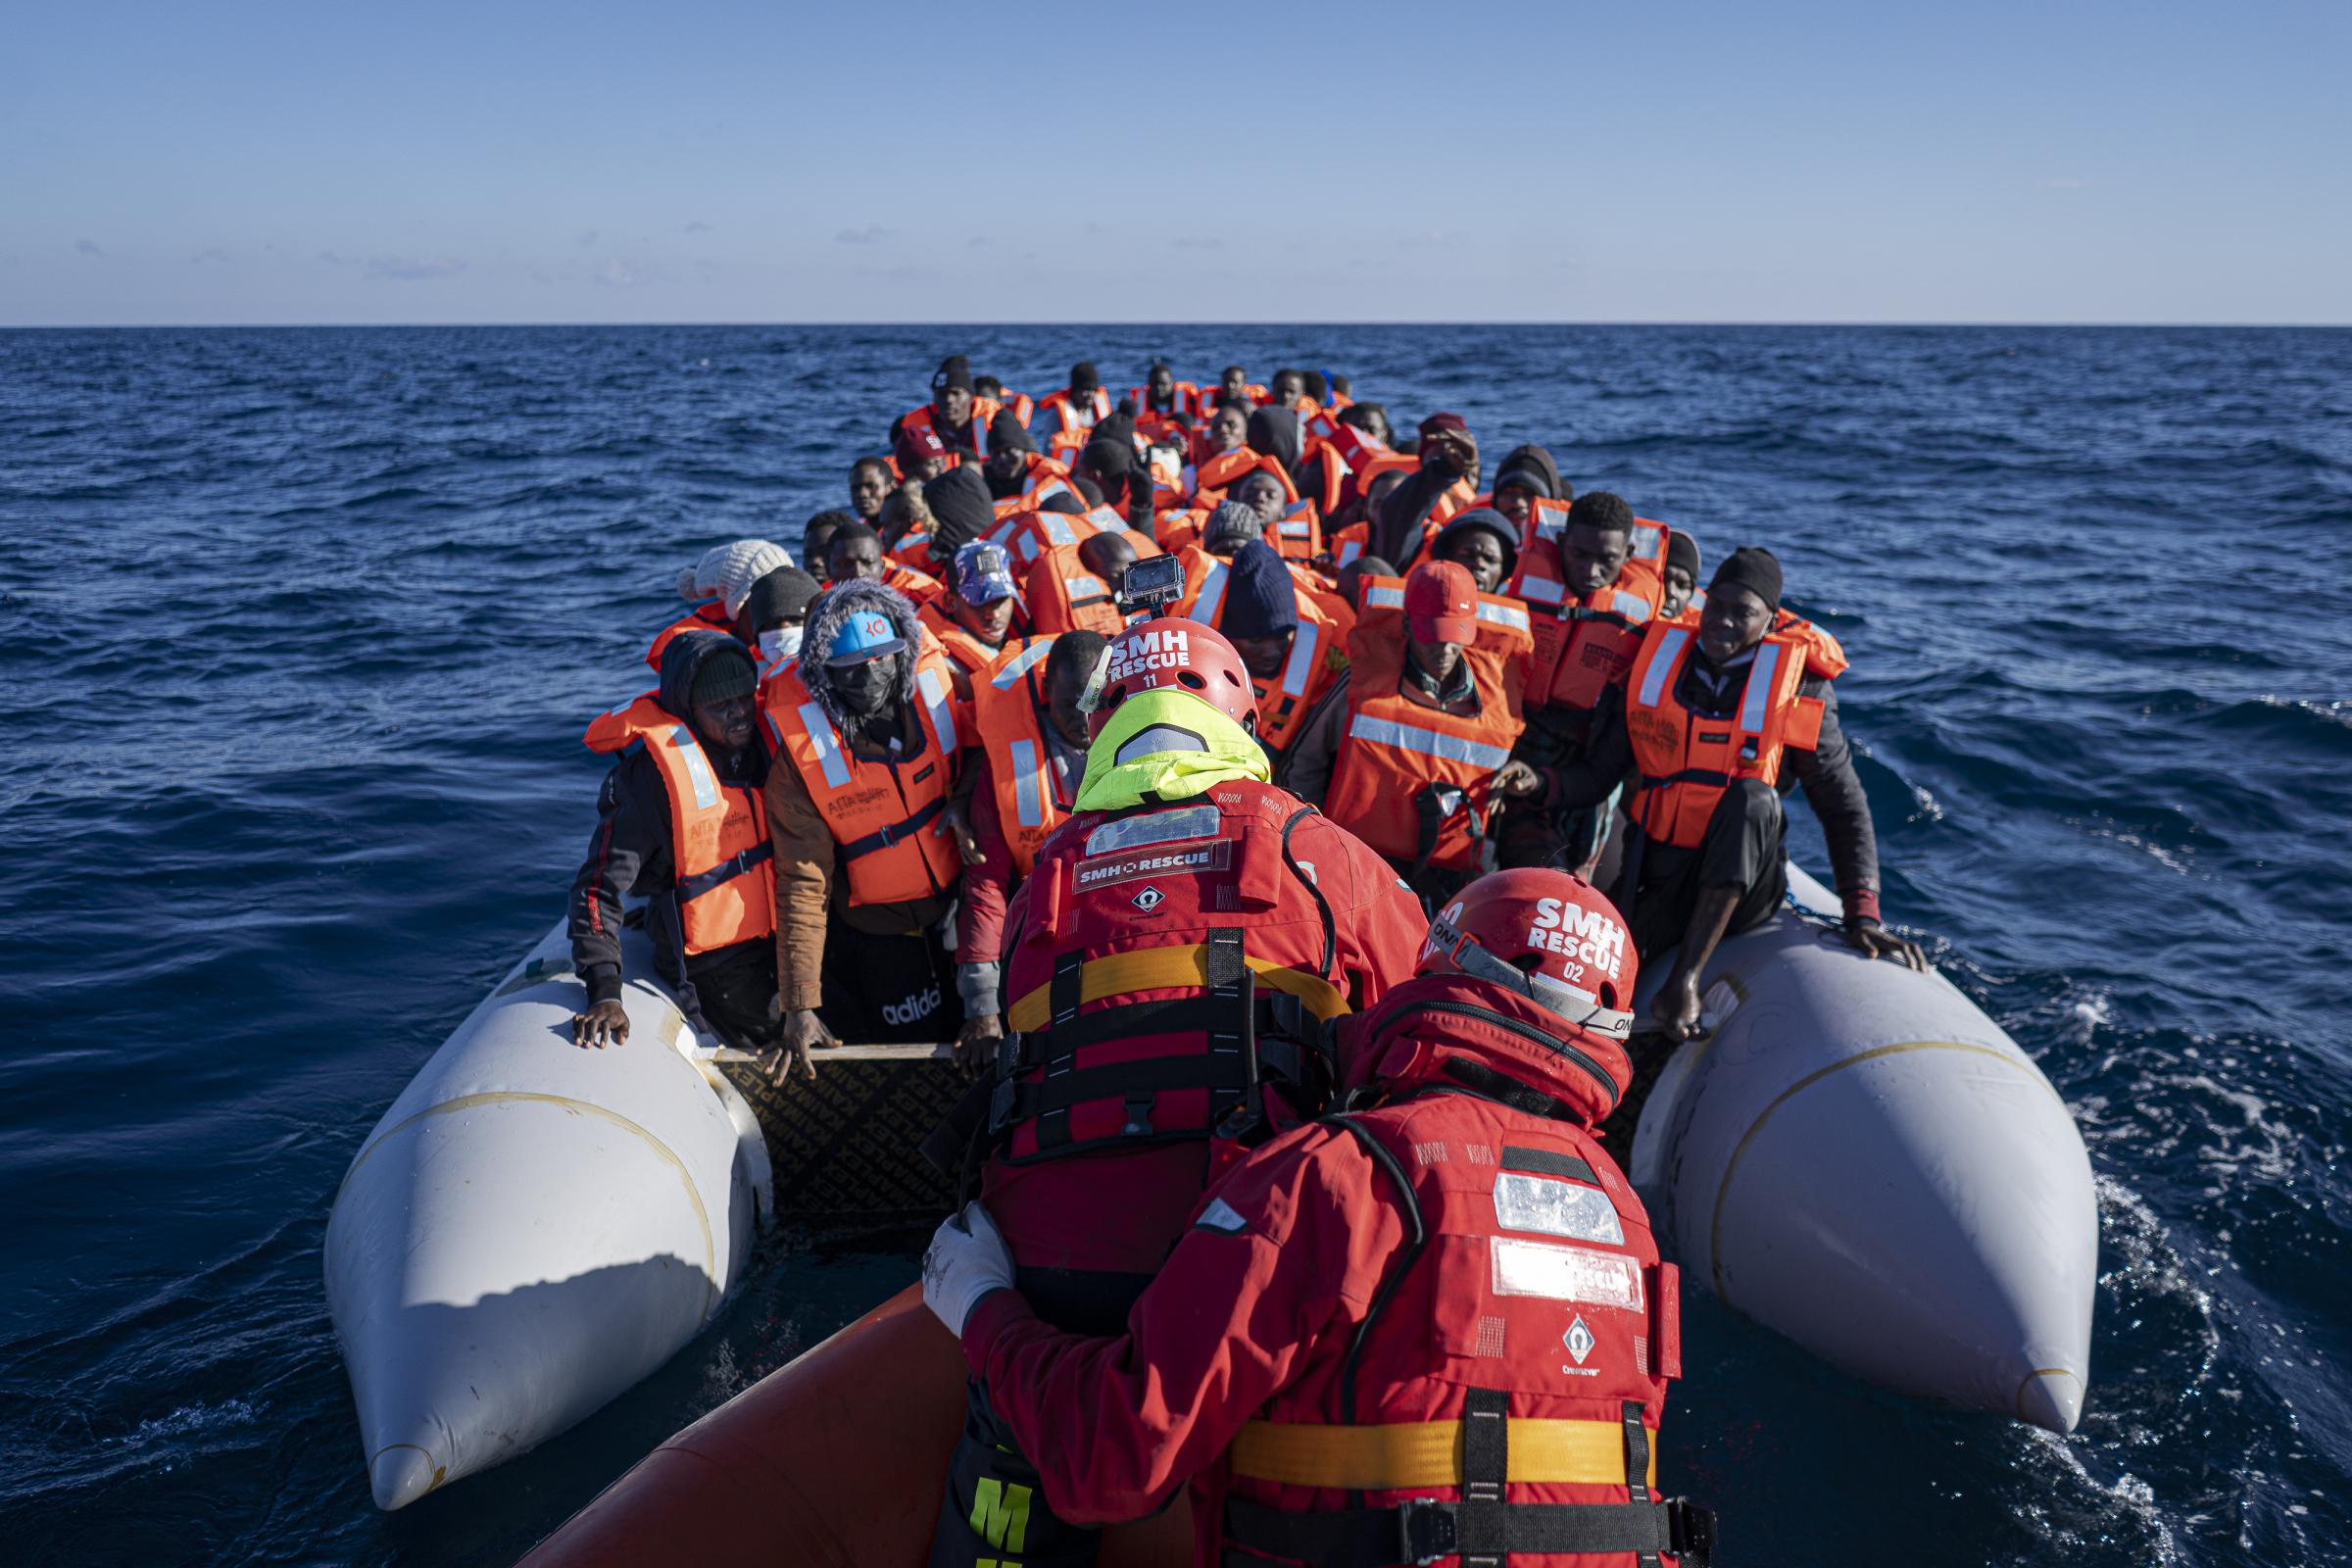 The 7th mission -  105 people are travelling in the rubber dinghy from...